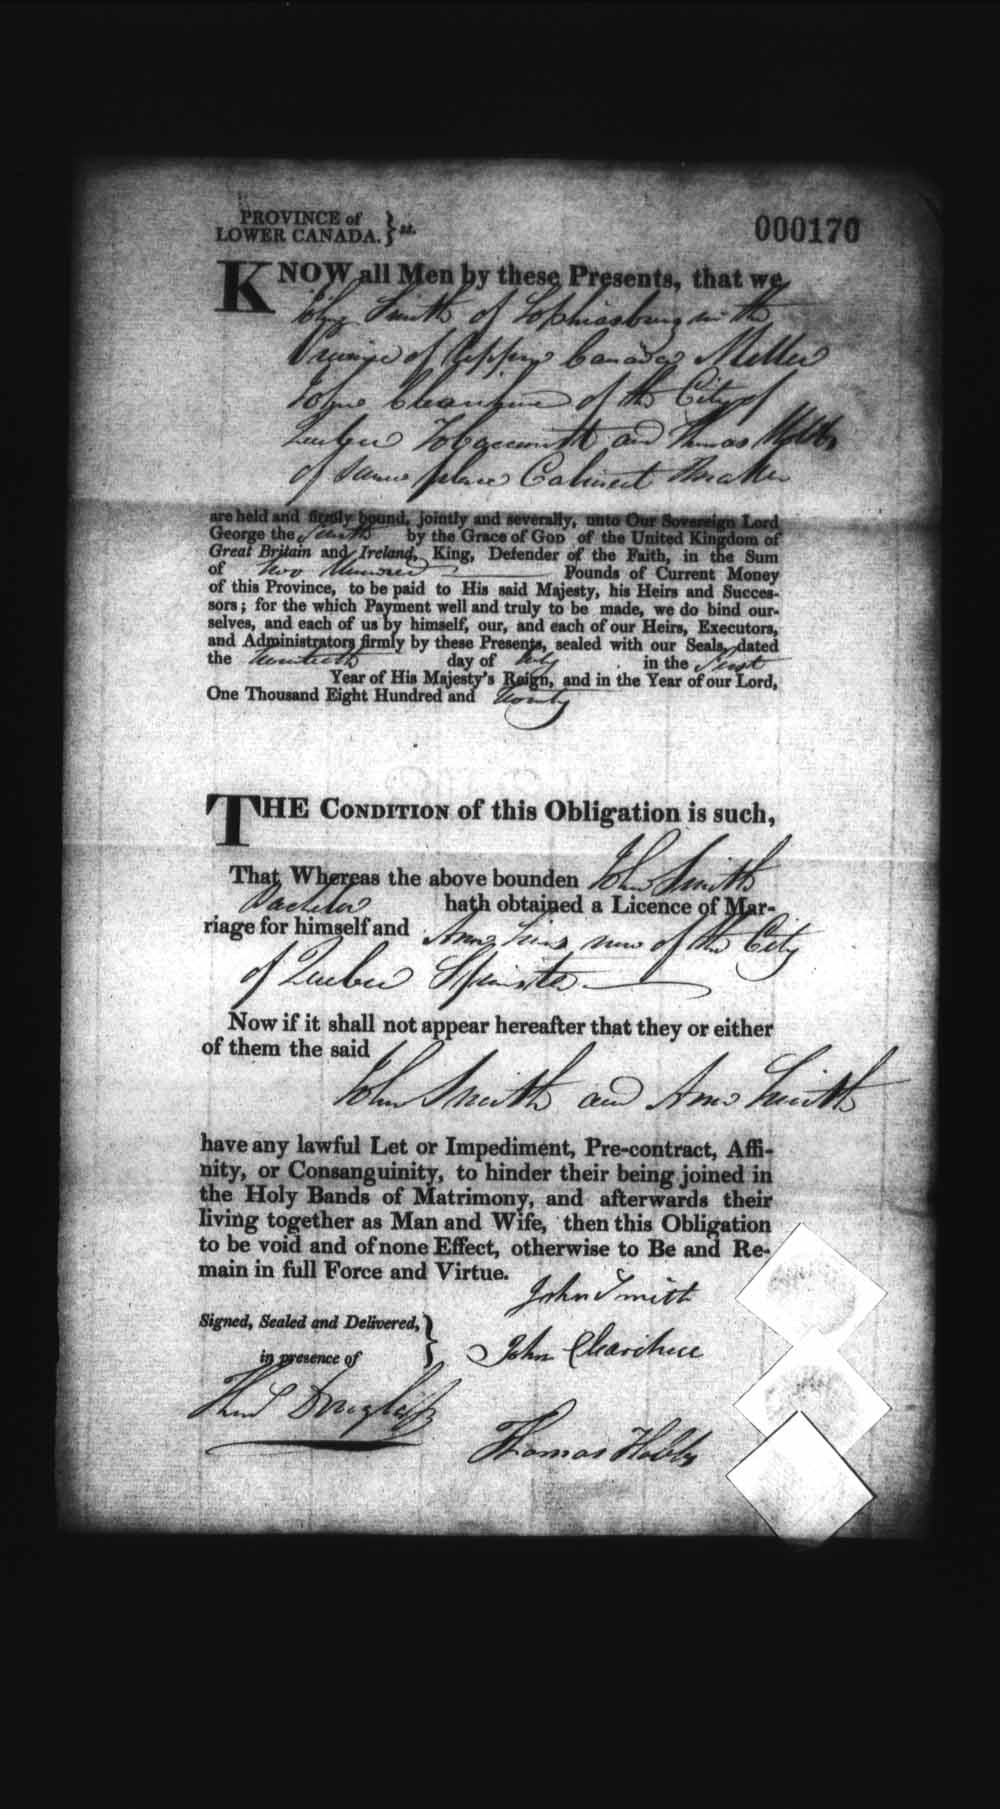 Digitized page of Upper and Lower Canada Marriage Bonds (1779-1865) for Image No.: e008236015